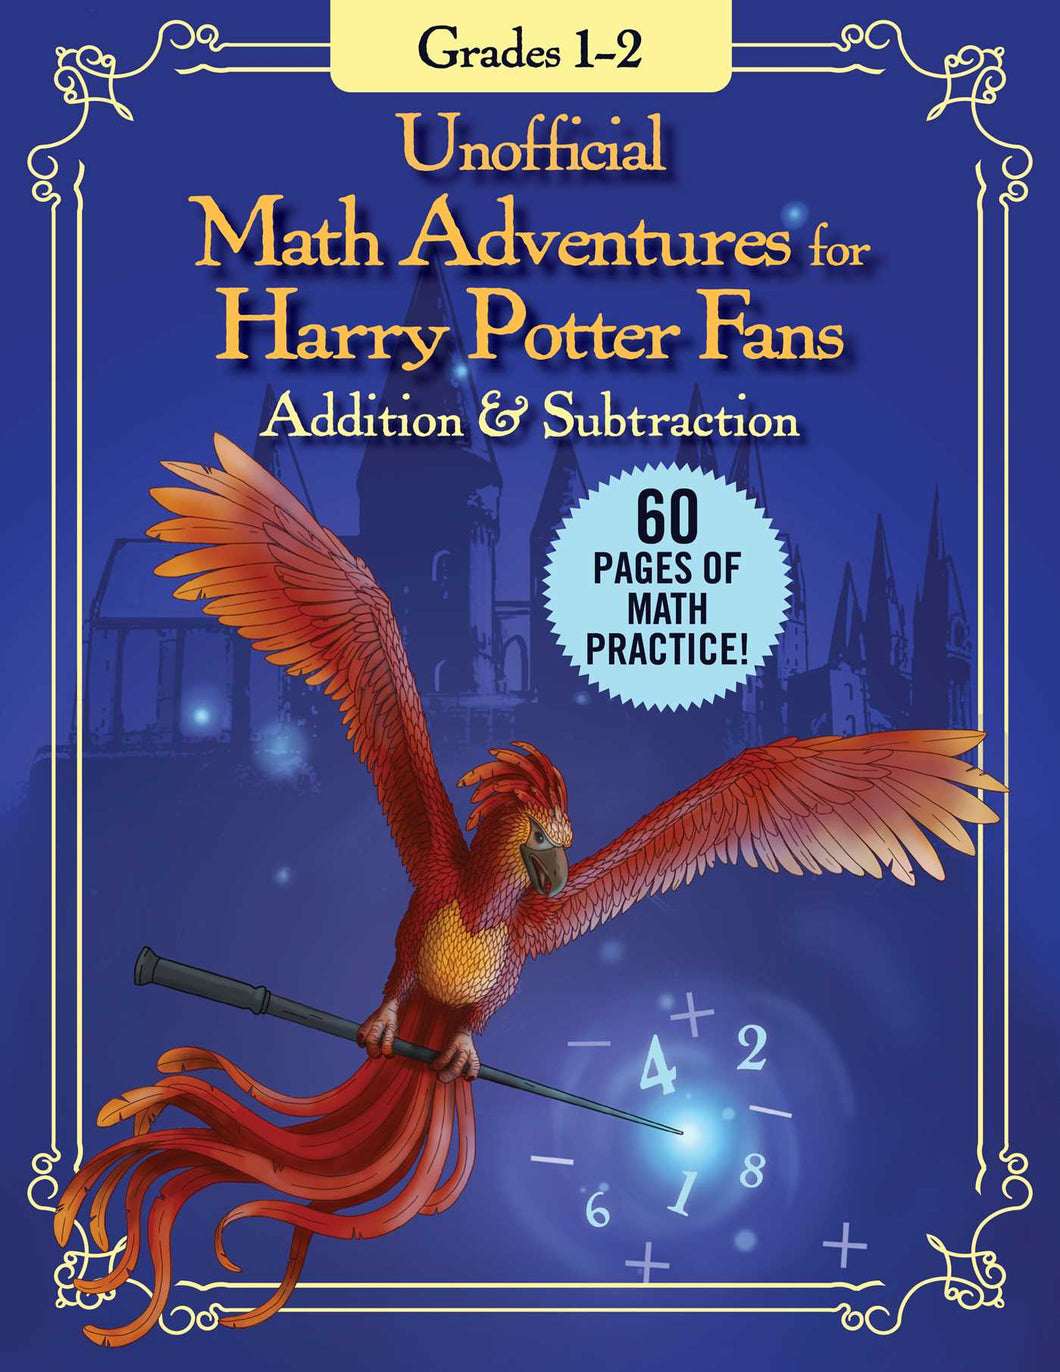 UNOFFICIAL MATH ADVENTURES FOR HARRY POTTER FANS: ADDITION & SUBTRACTION